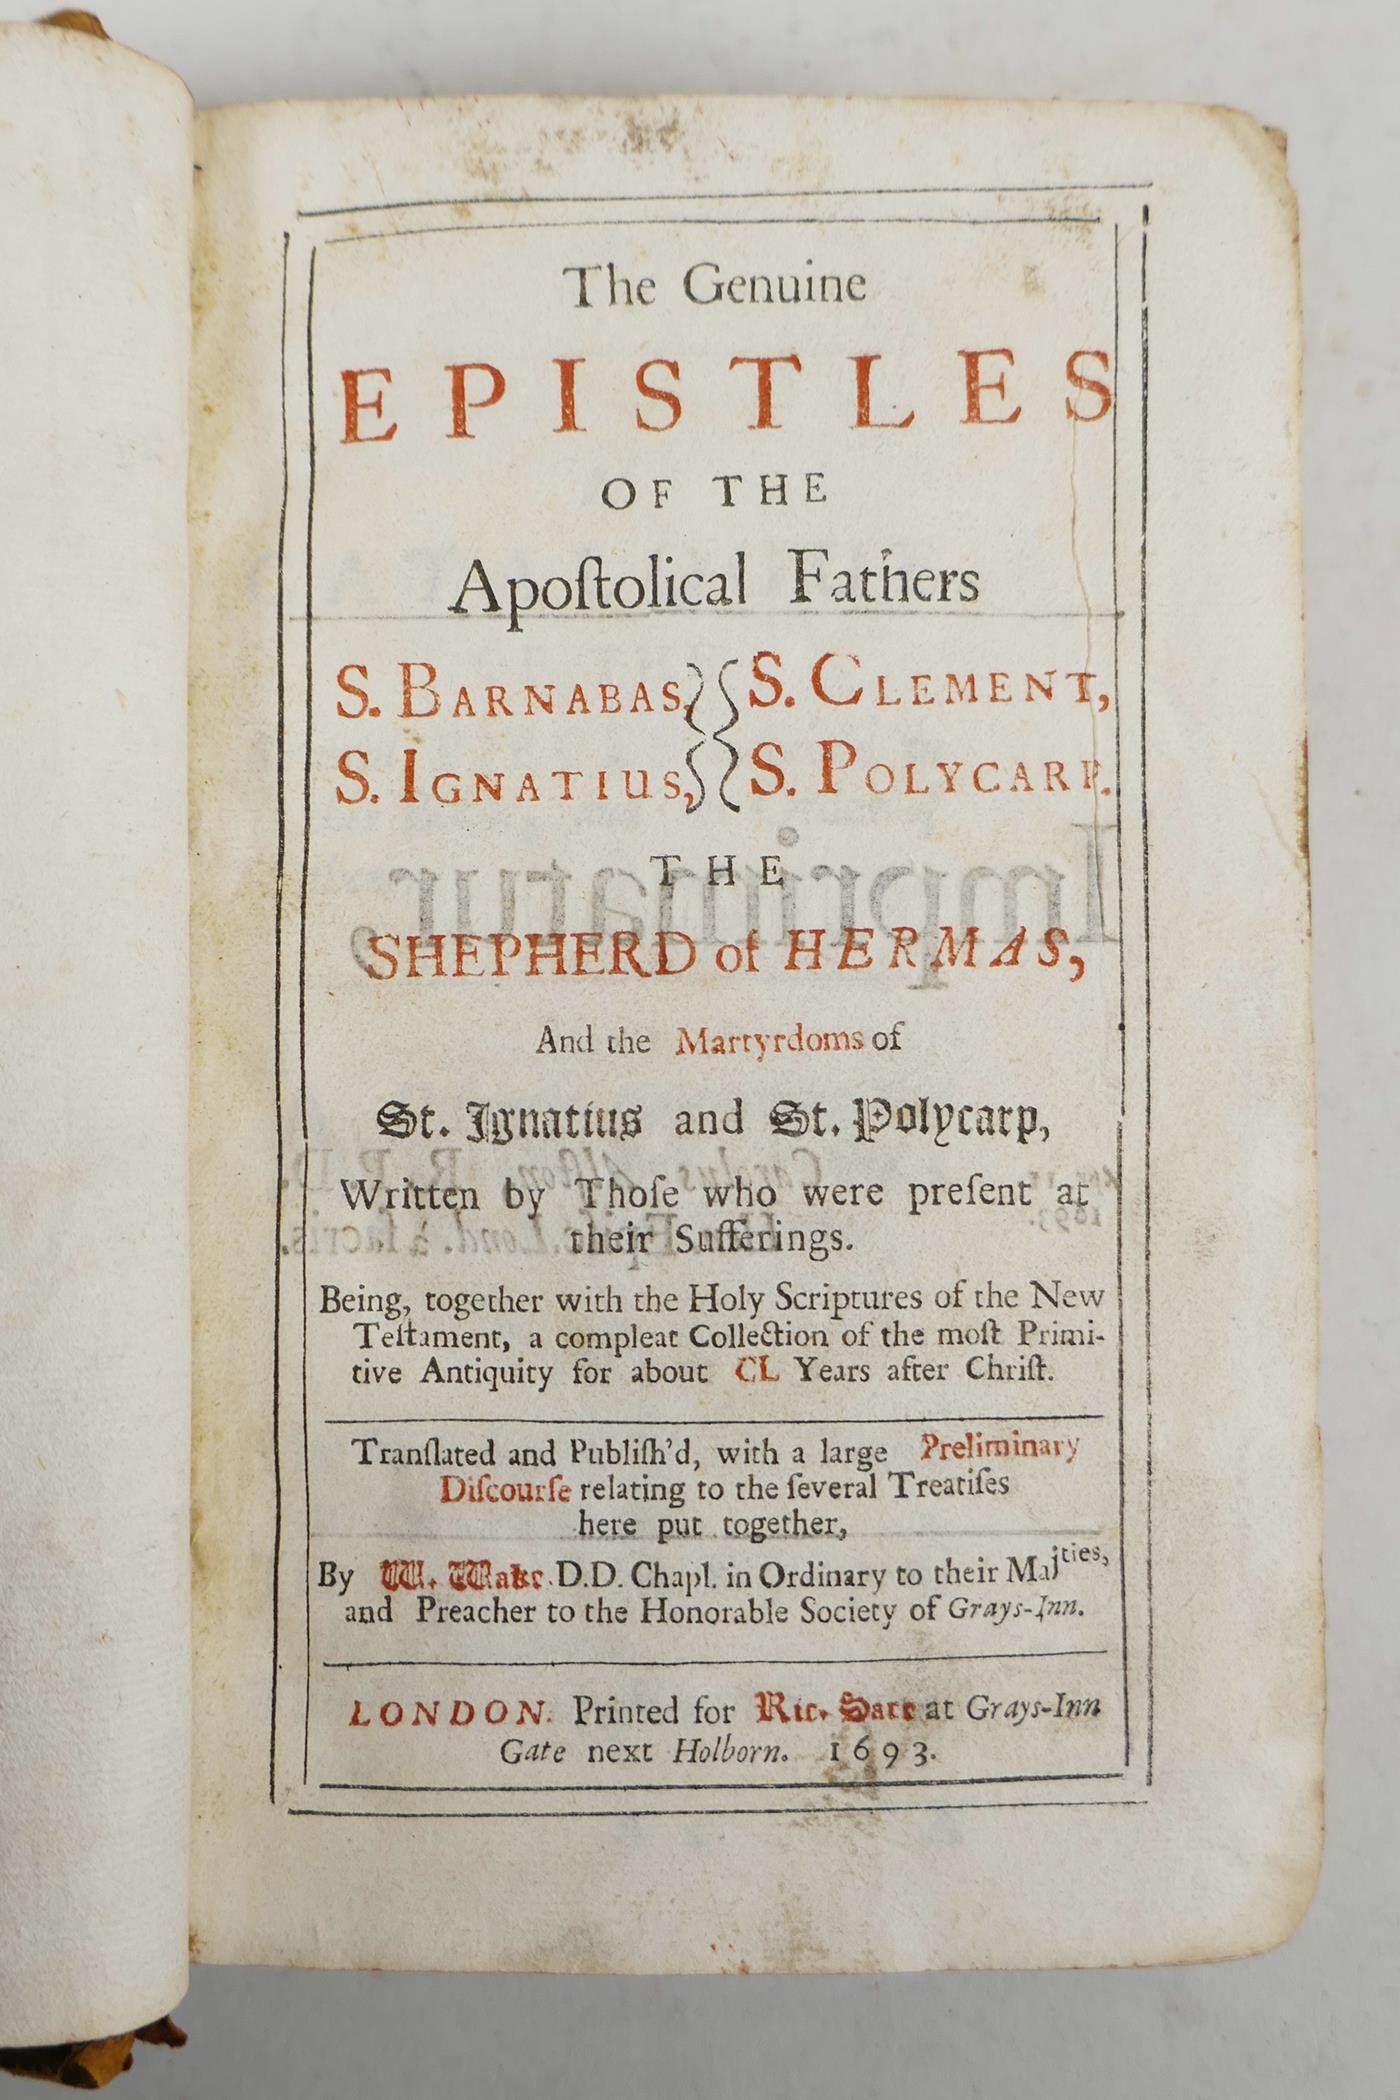 Edited by William Wake (1657-1737), 'The Genuine Epistles of the Apostolical fathers S. Barnabus, S.